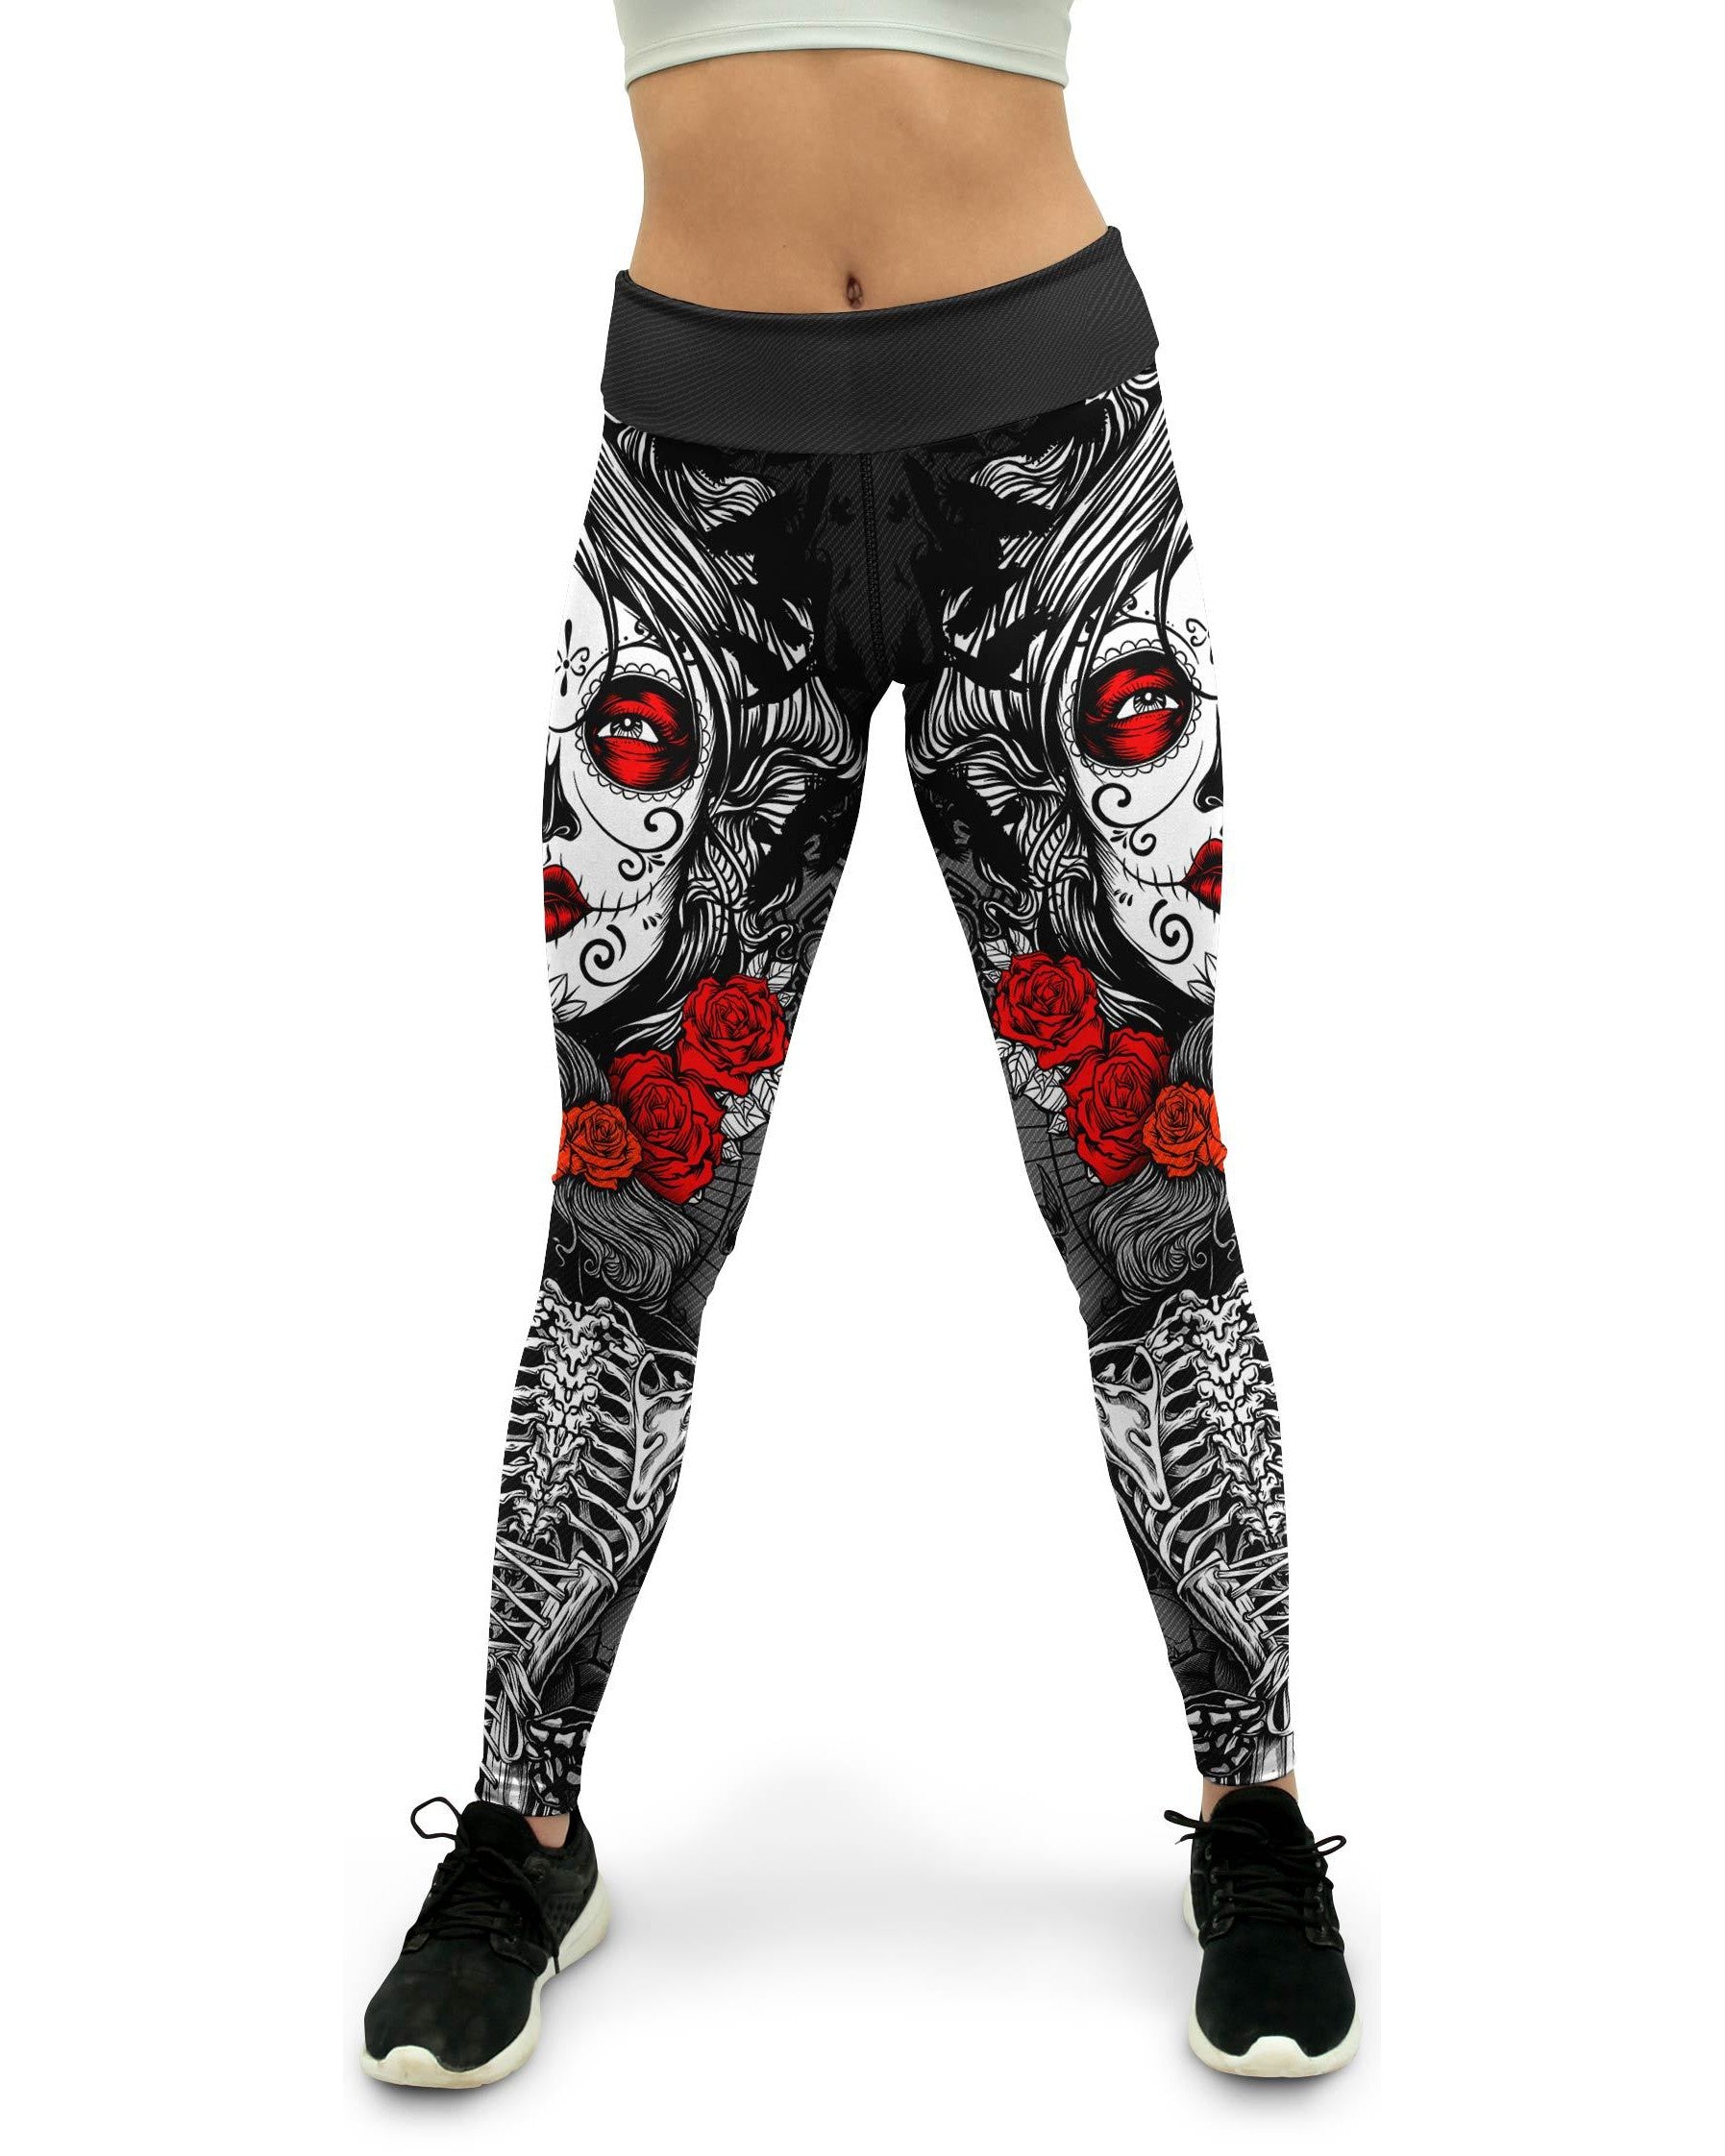 Simple Skull Workout Pants for Gym